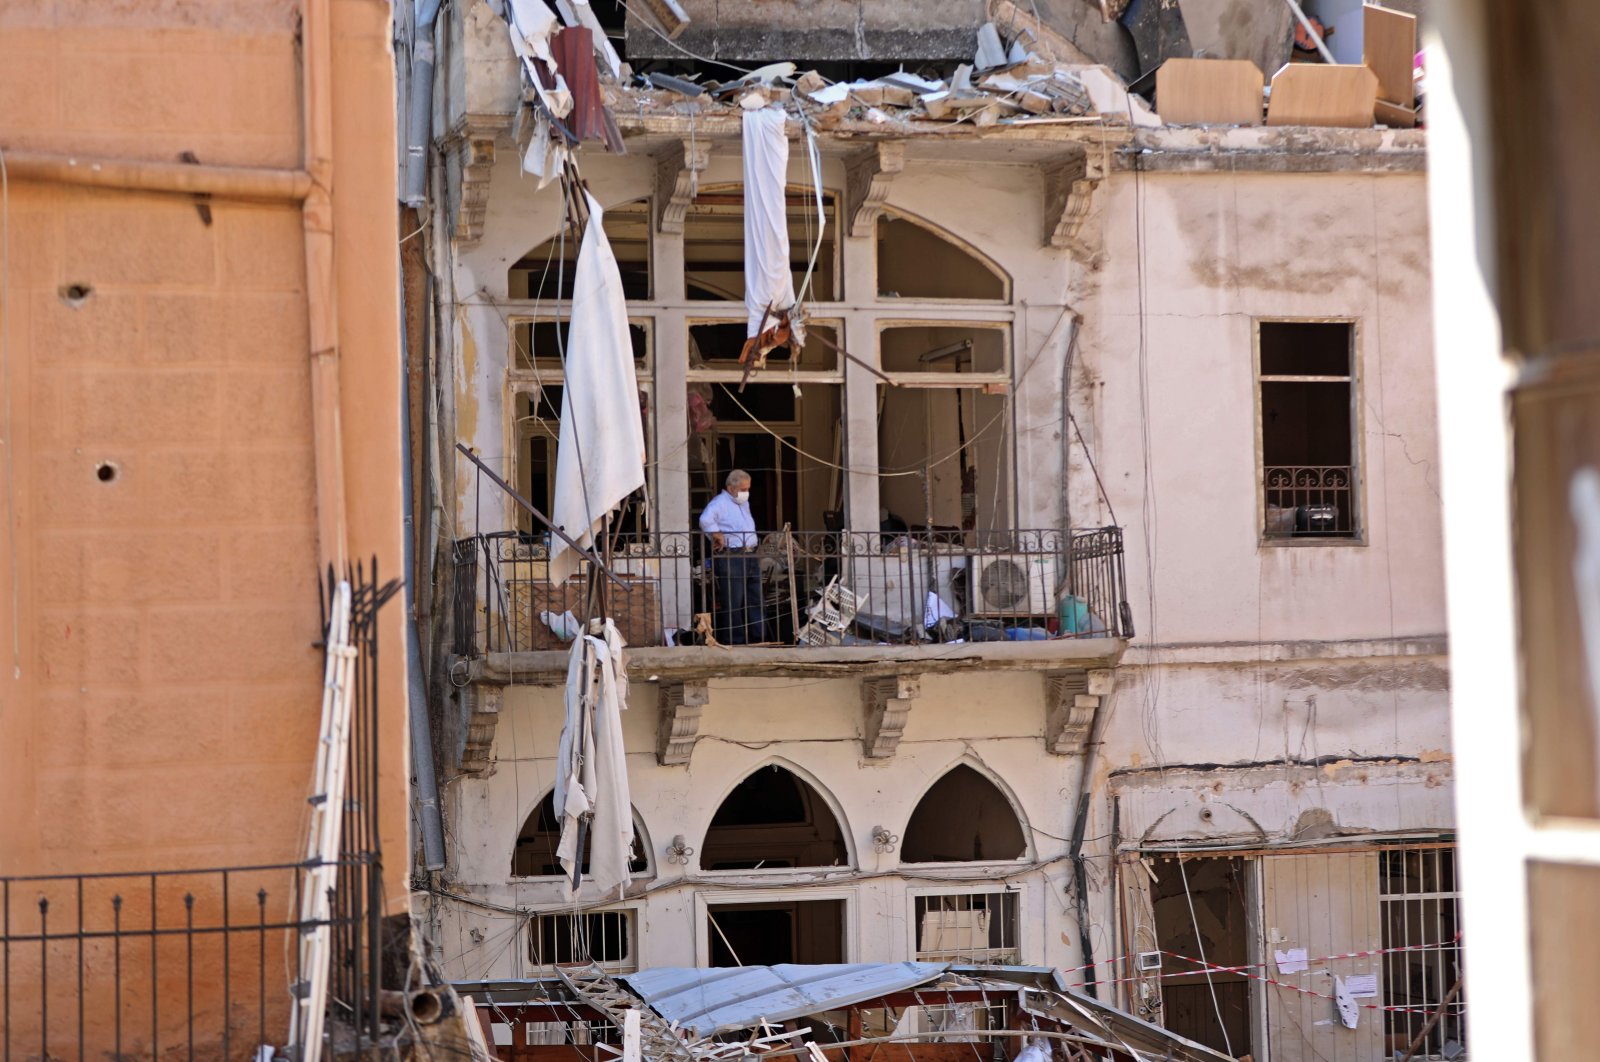 A man, clad in a mask due to the COVID-19 pandemic, stands amid debris on a balcony in the partially destroyed neighborhood of Mar Mikhael, Beirut, Lebanon, Aug. 14, 2020. (AFP Photo)